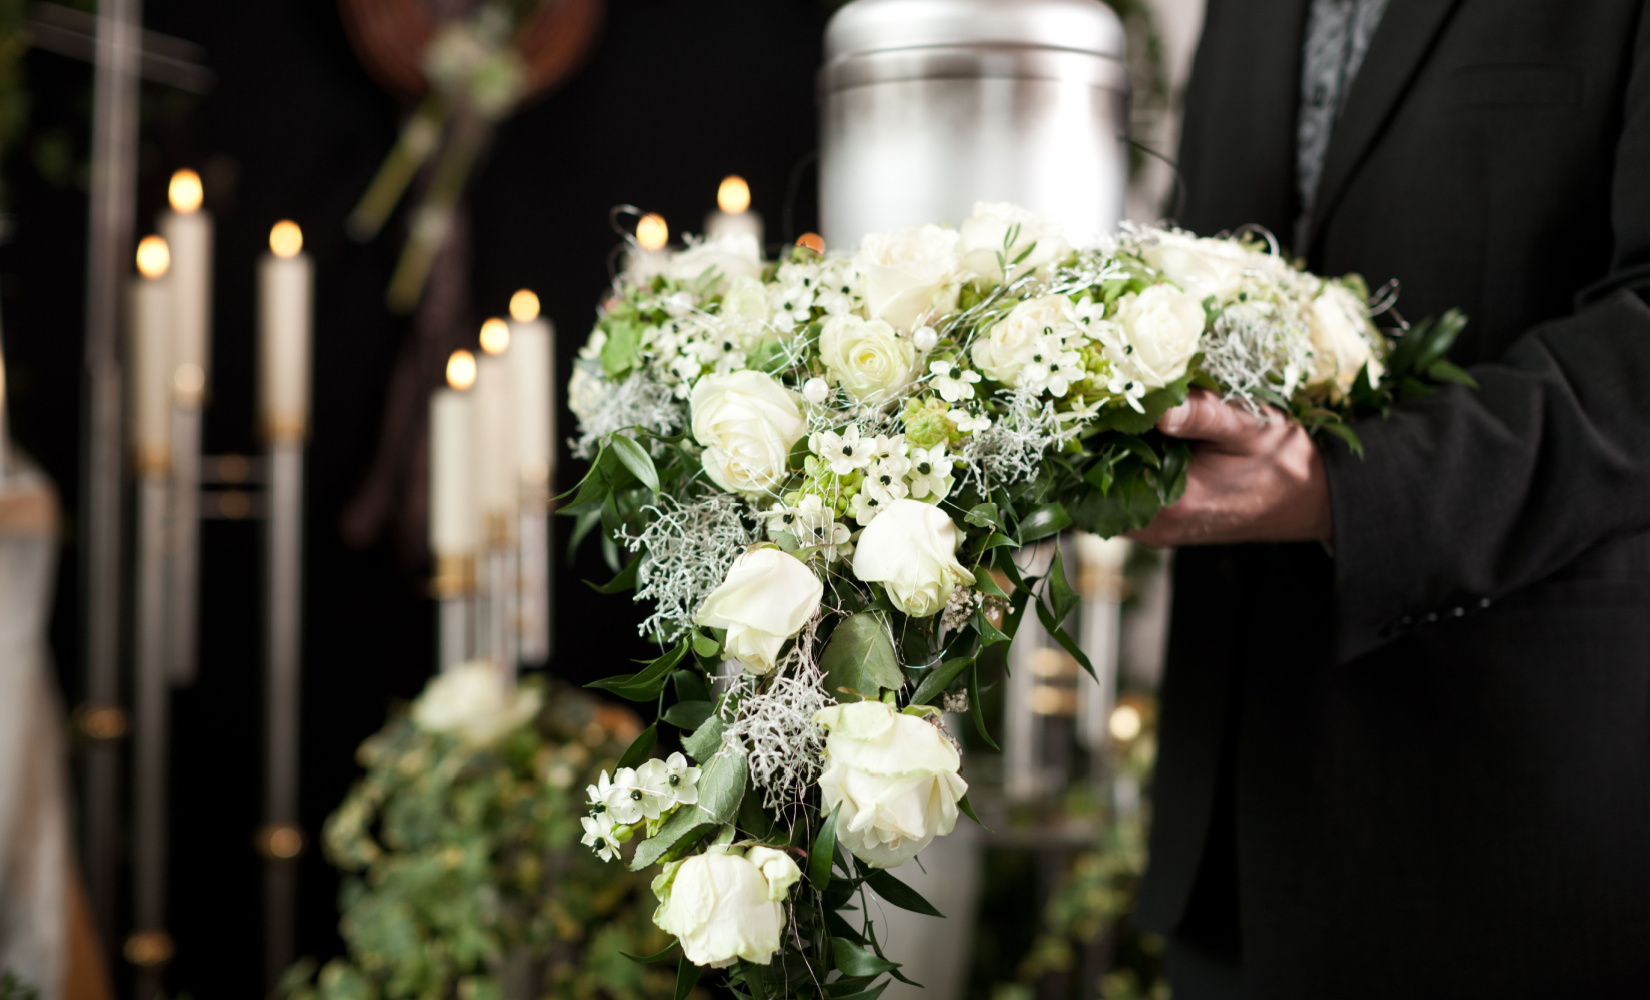 A man holding funeral flowers.